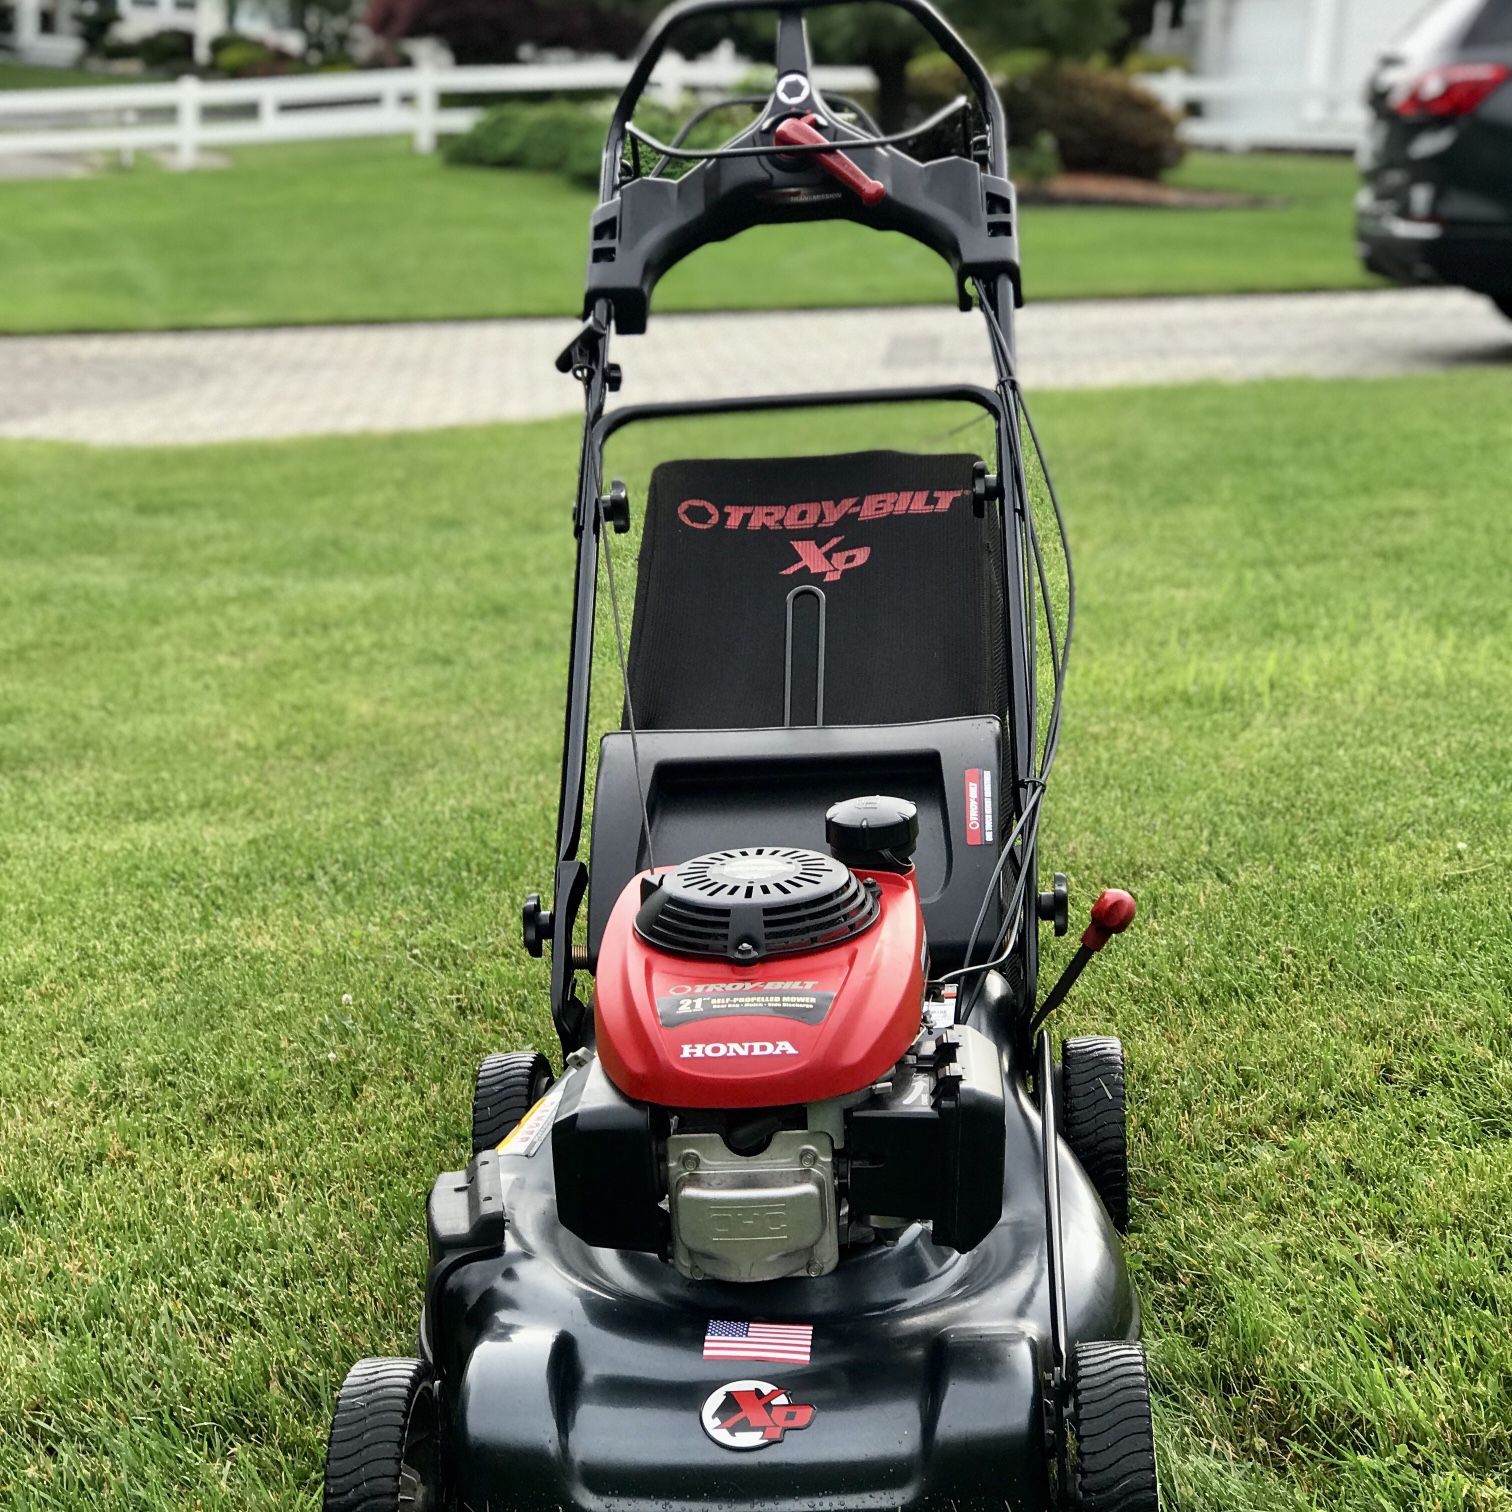 CRAFTSMAN M250 160-cc 21-in Gas Self-propelled Lawn Mower, 58% OFF